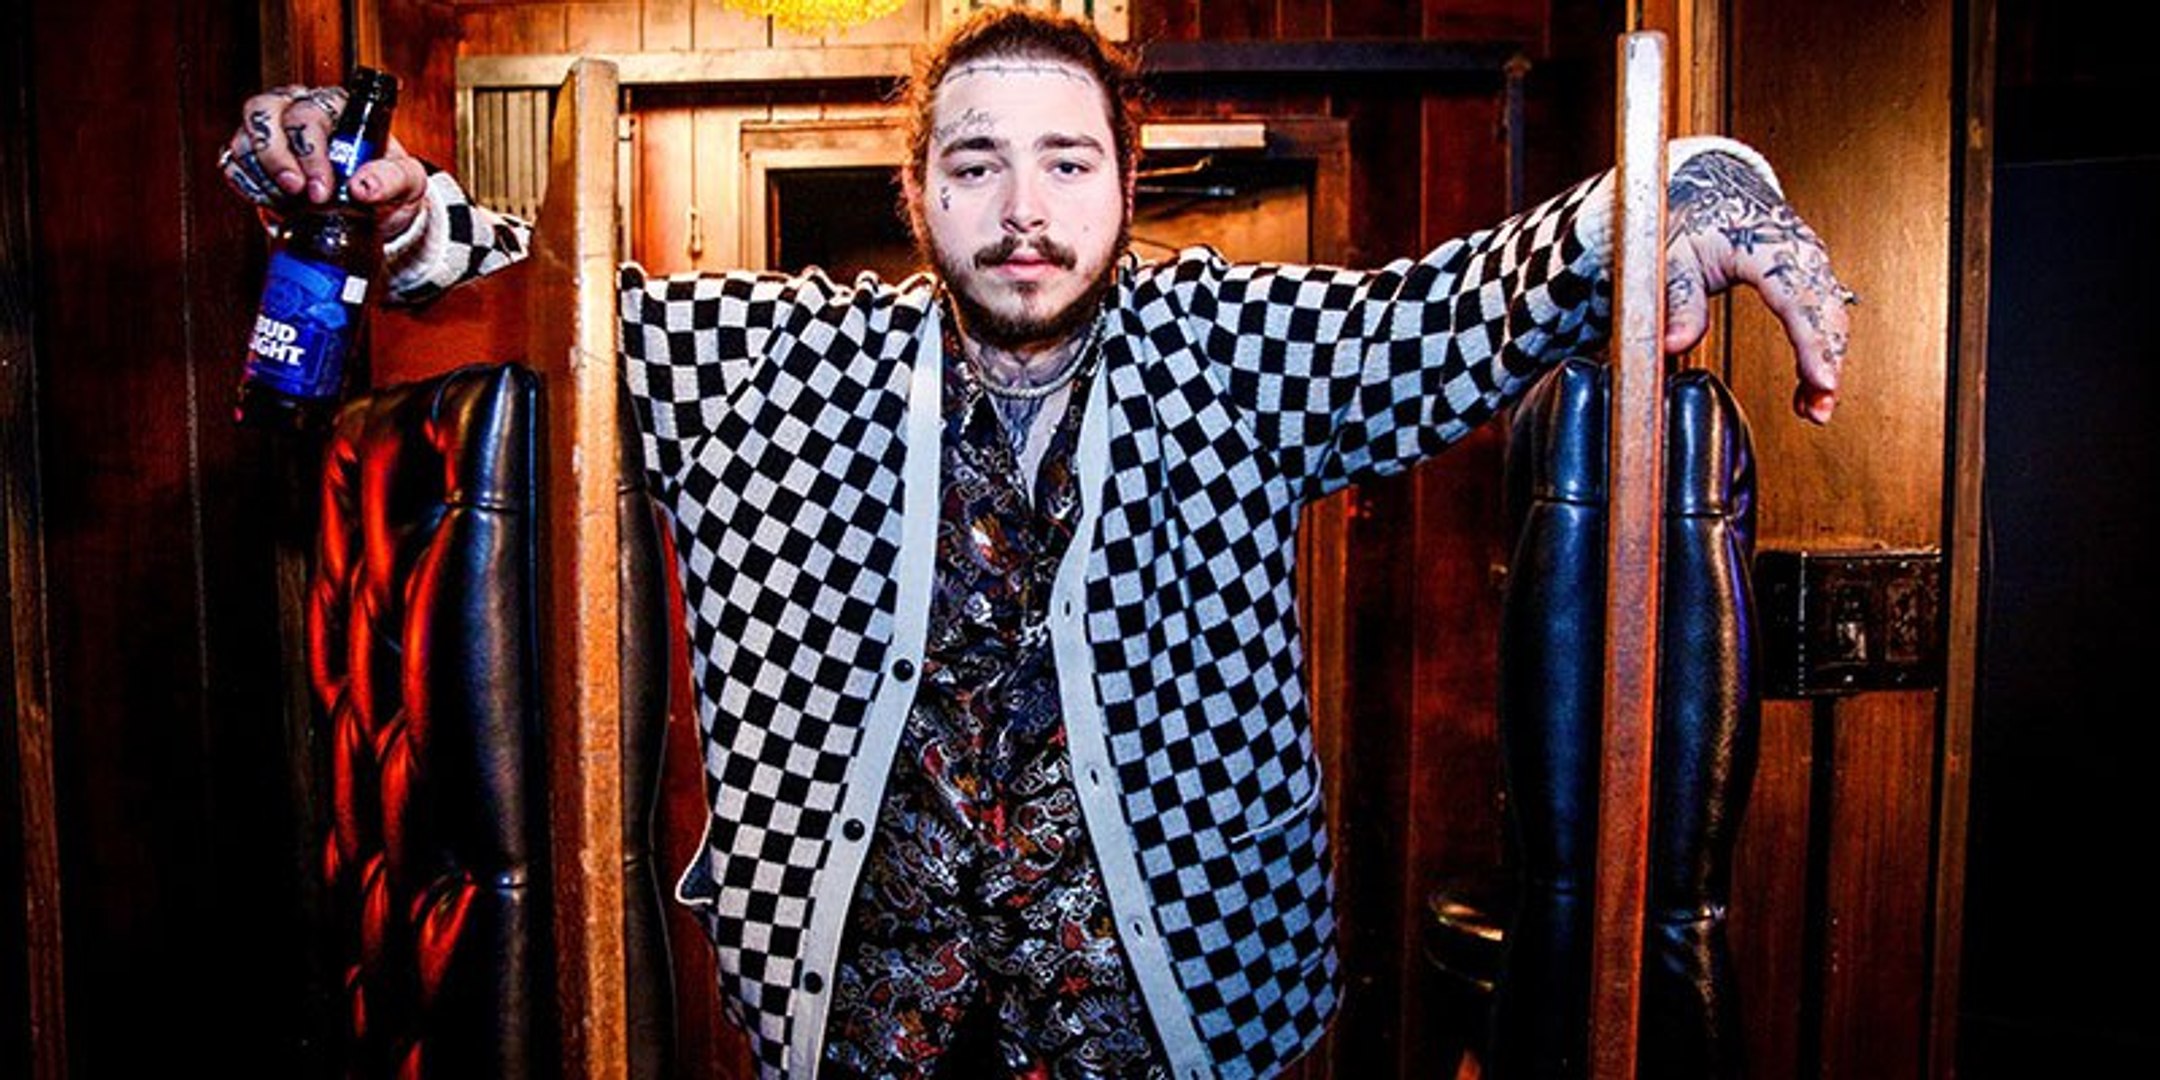 ⁣Post Malone’s Plane To Make Emergency Landing After Blowing Tires